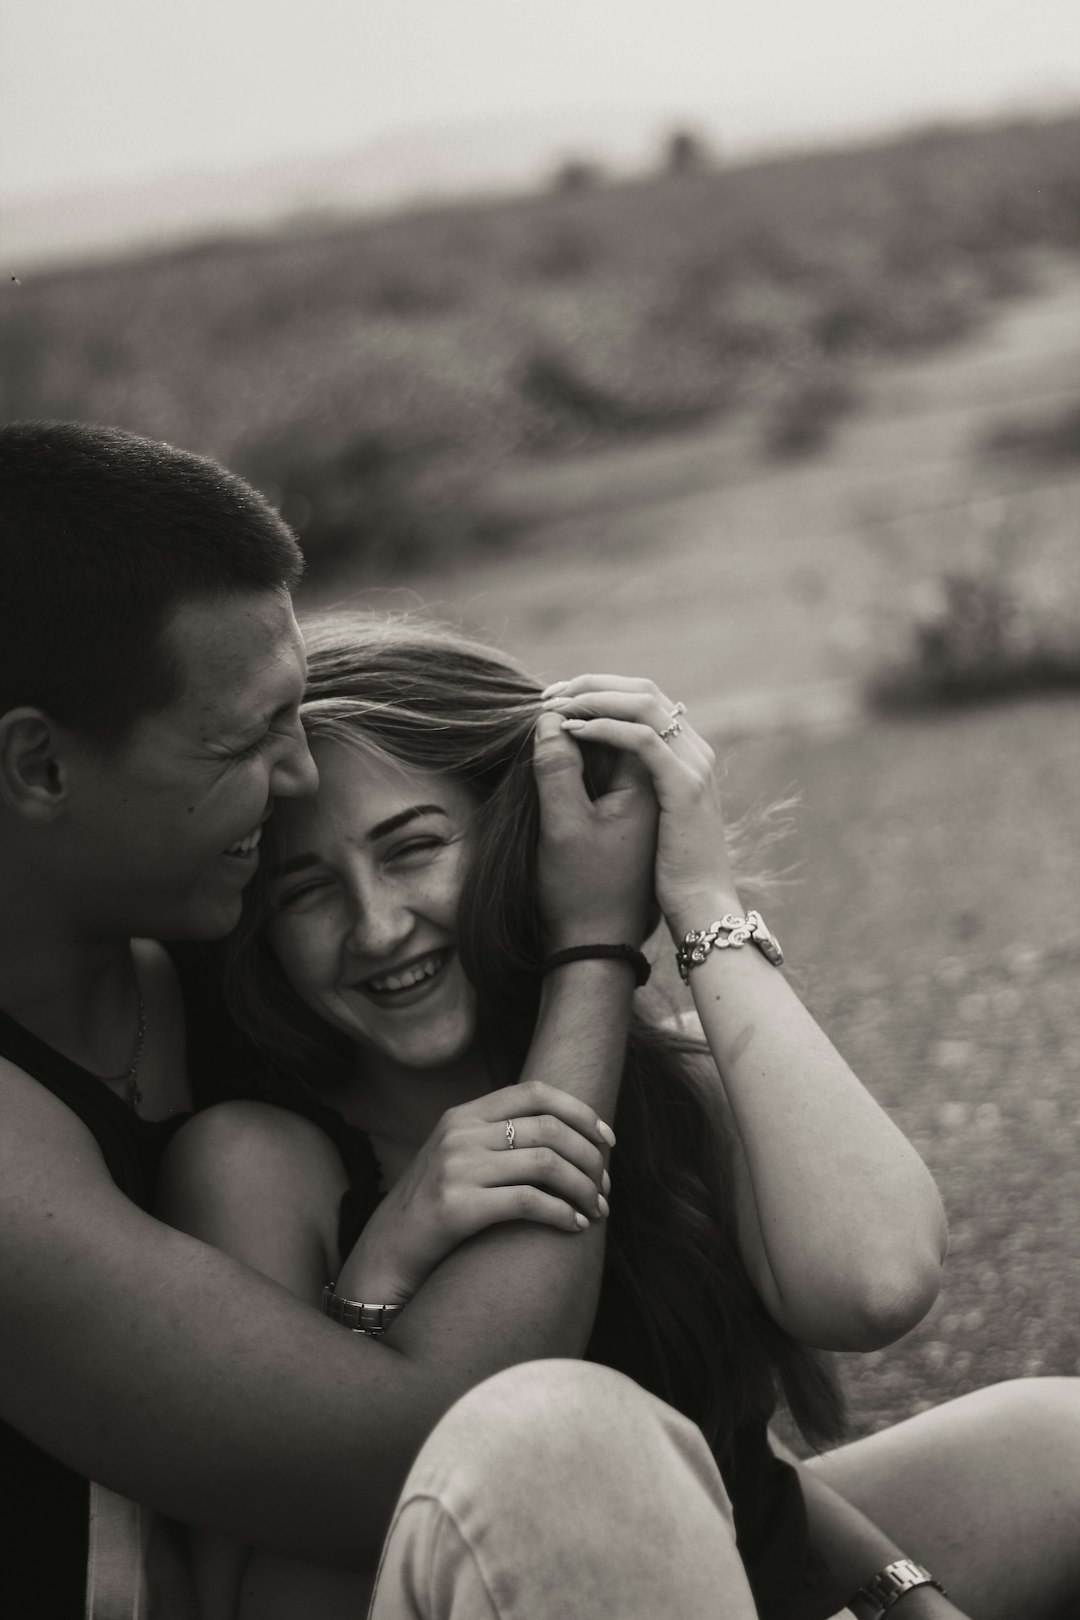 grayscale photo of man and woman smiling